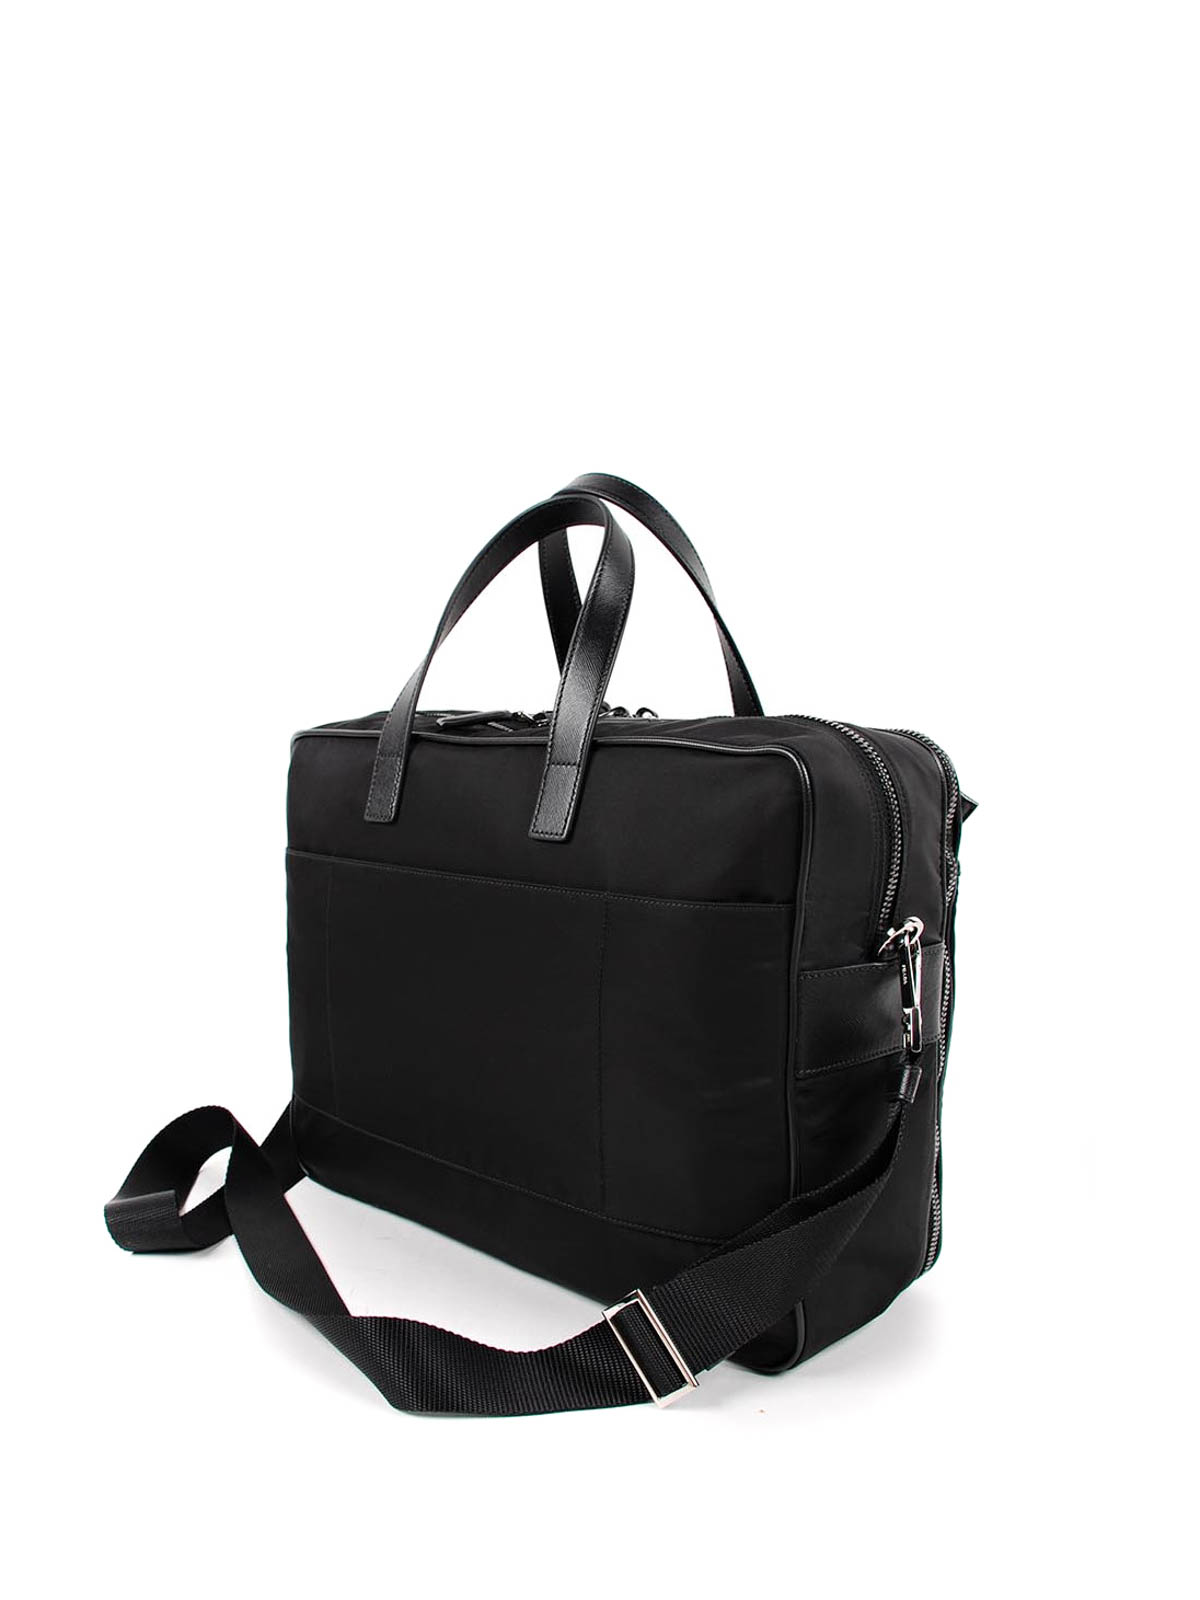 Prada Laptop Bags & Business Briefcases - Men - 15 products